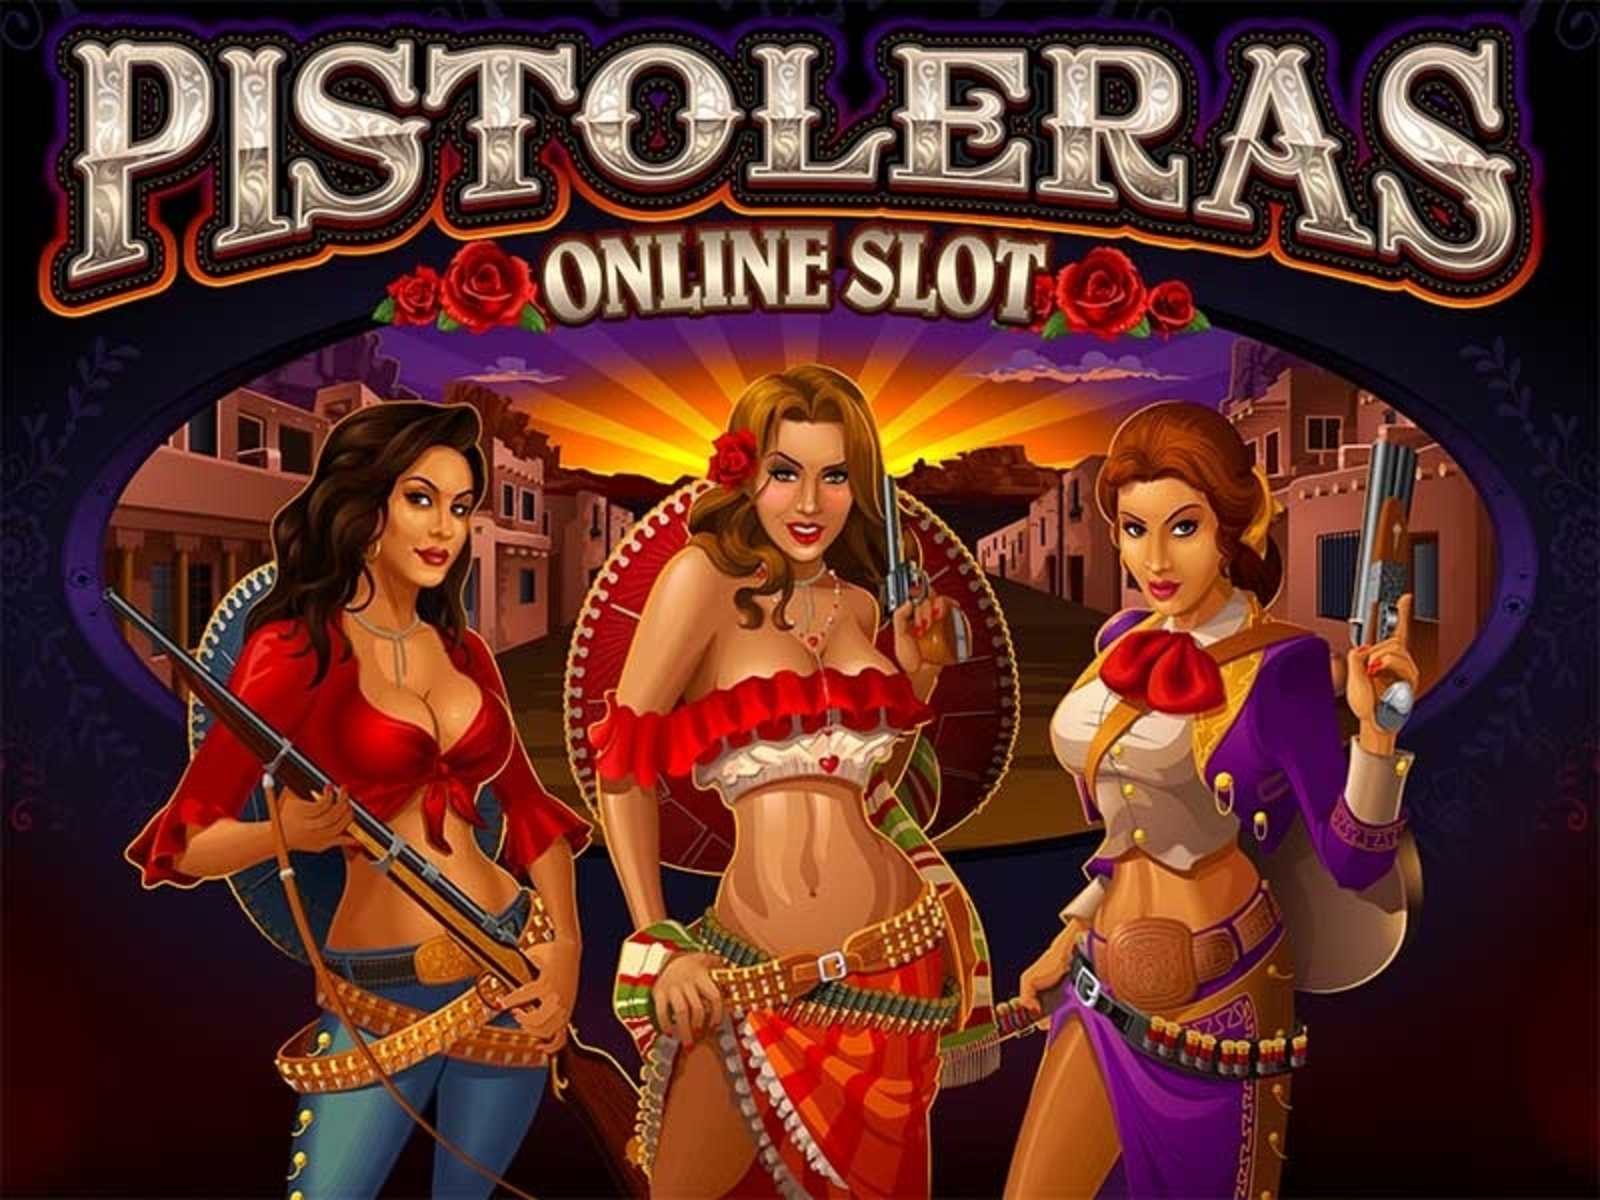 The Pistoleras Online Slot Demo Game by Microgaming